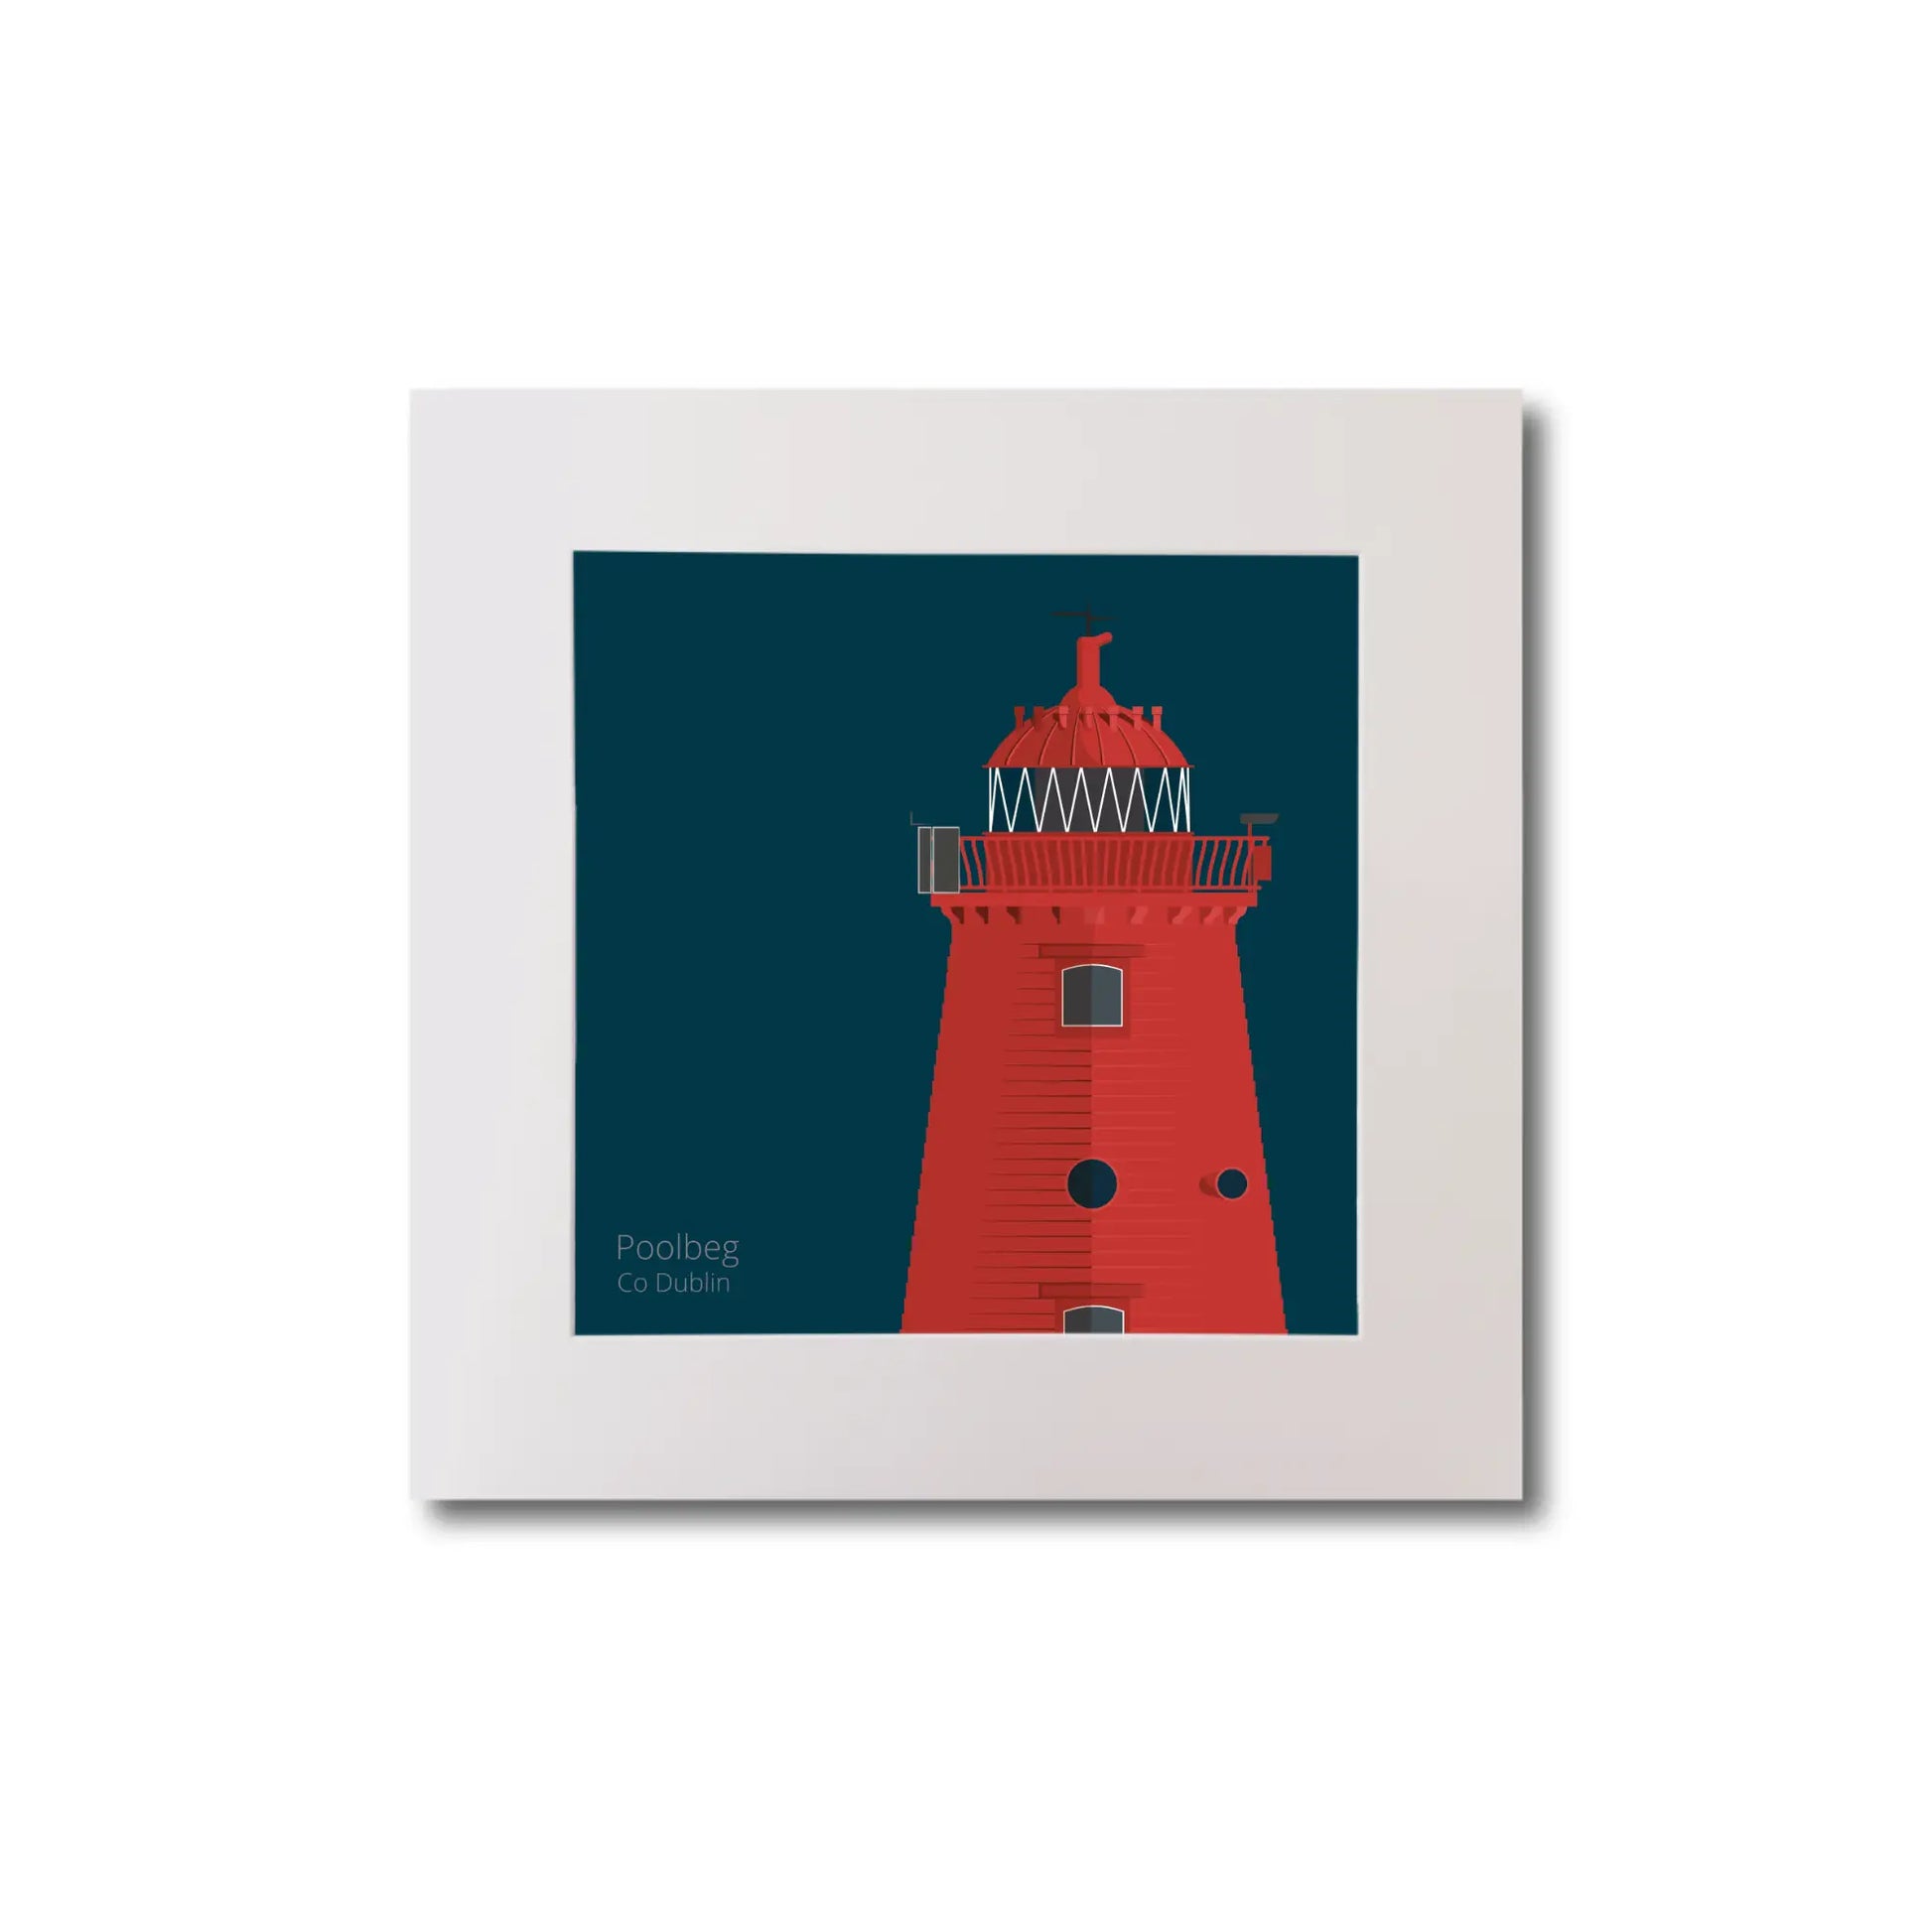 Illustration of Poolbeg lighthouse on a midnight blue background, mounted and measuring 20x20cm.